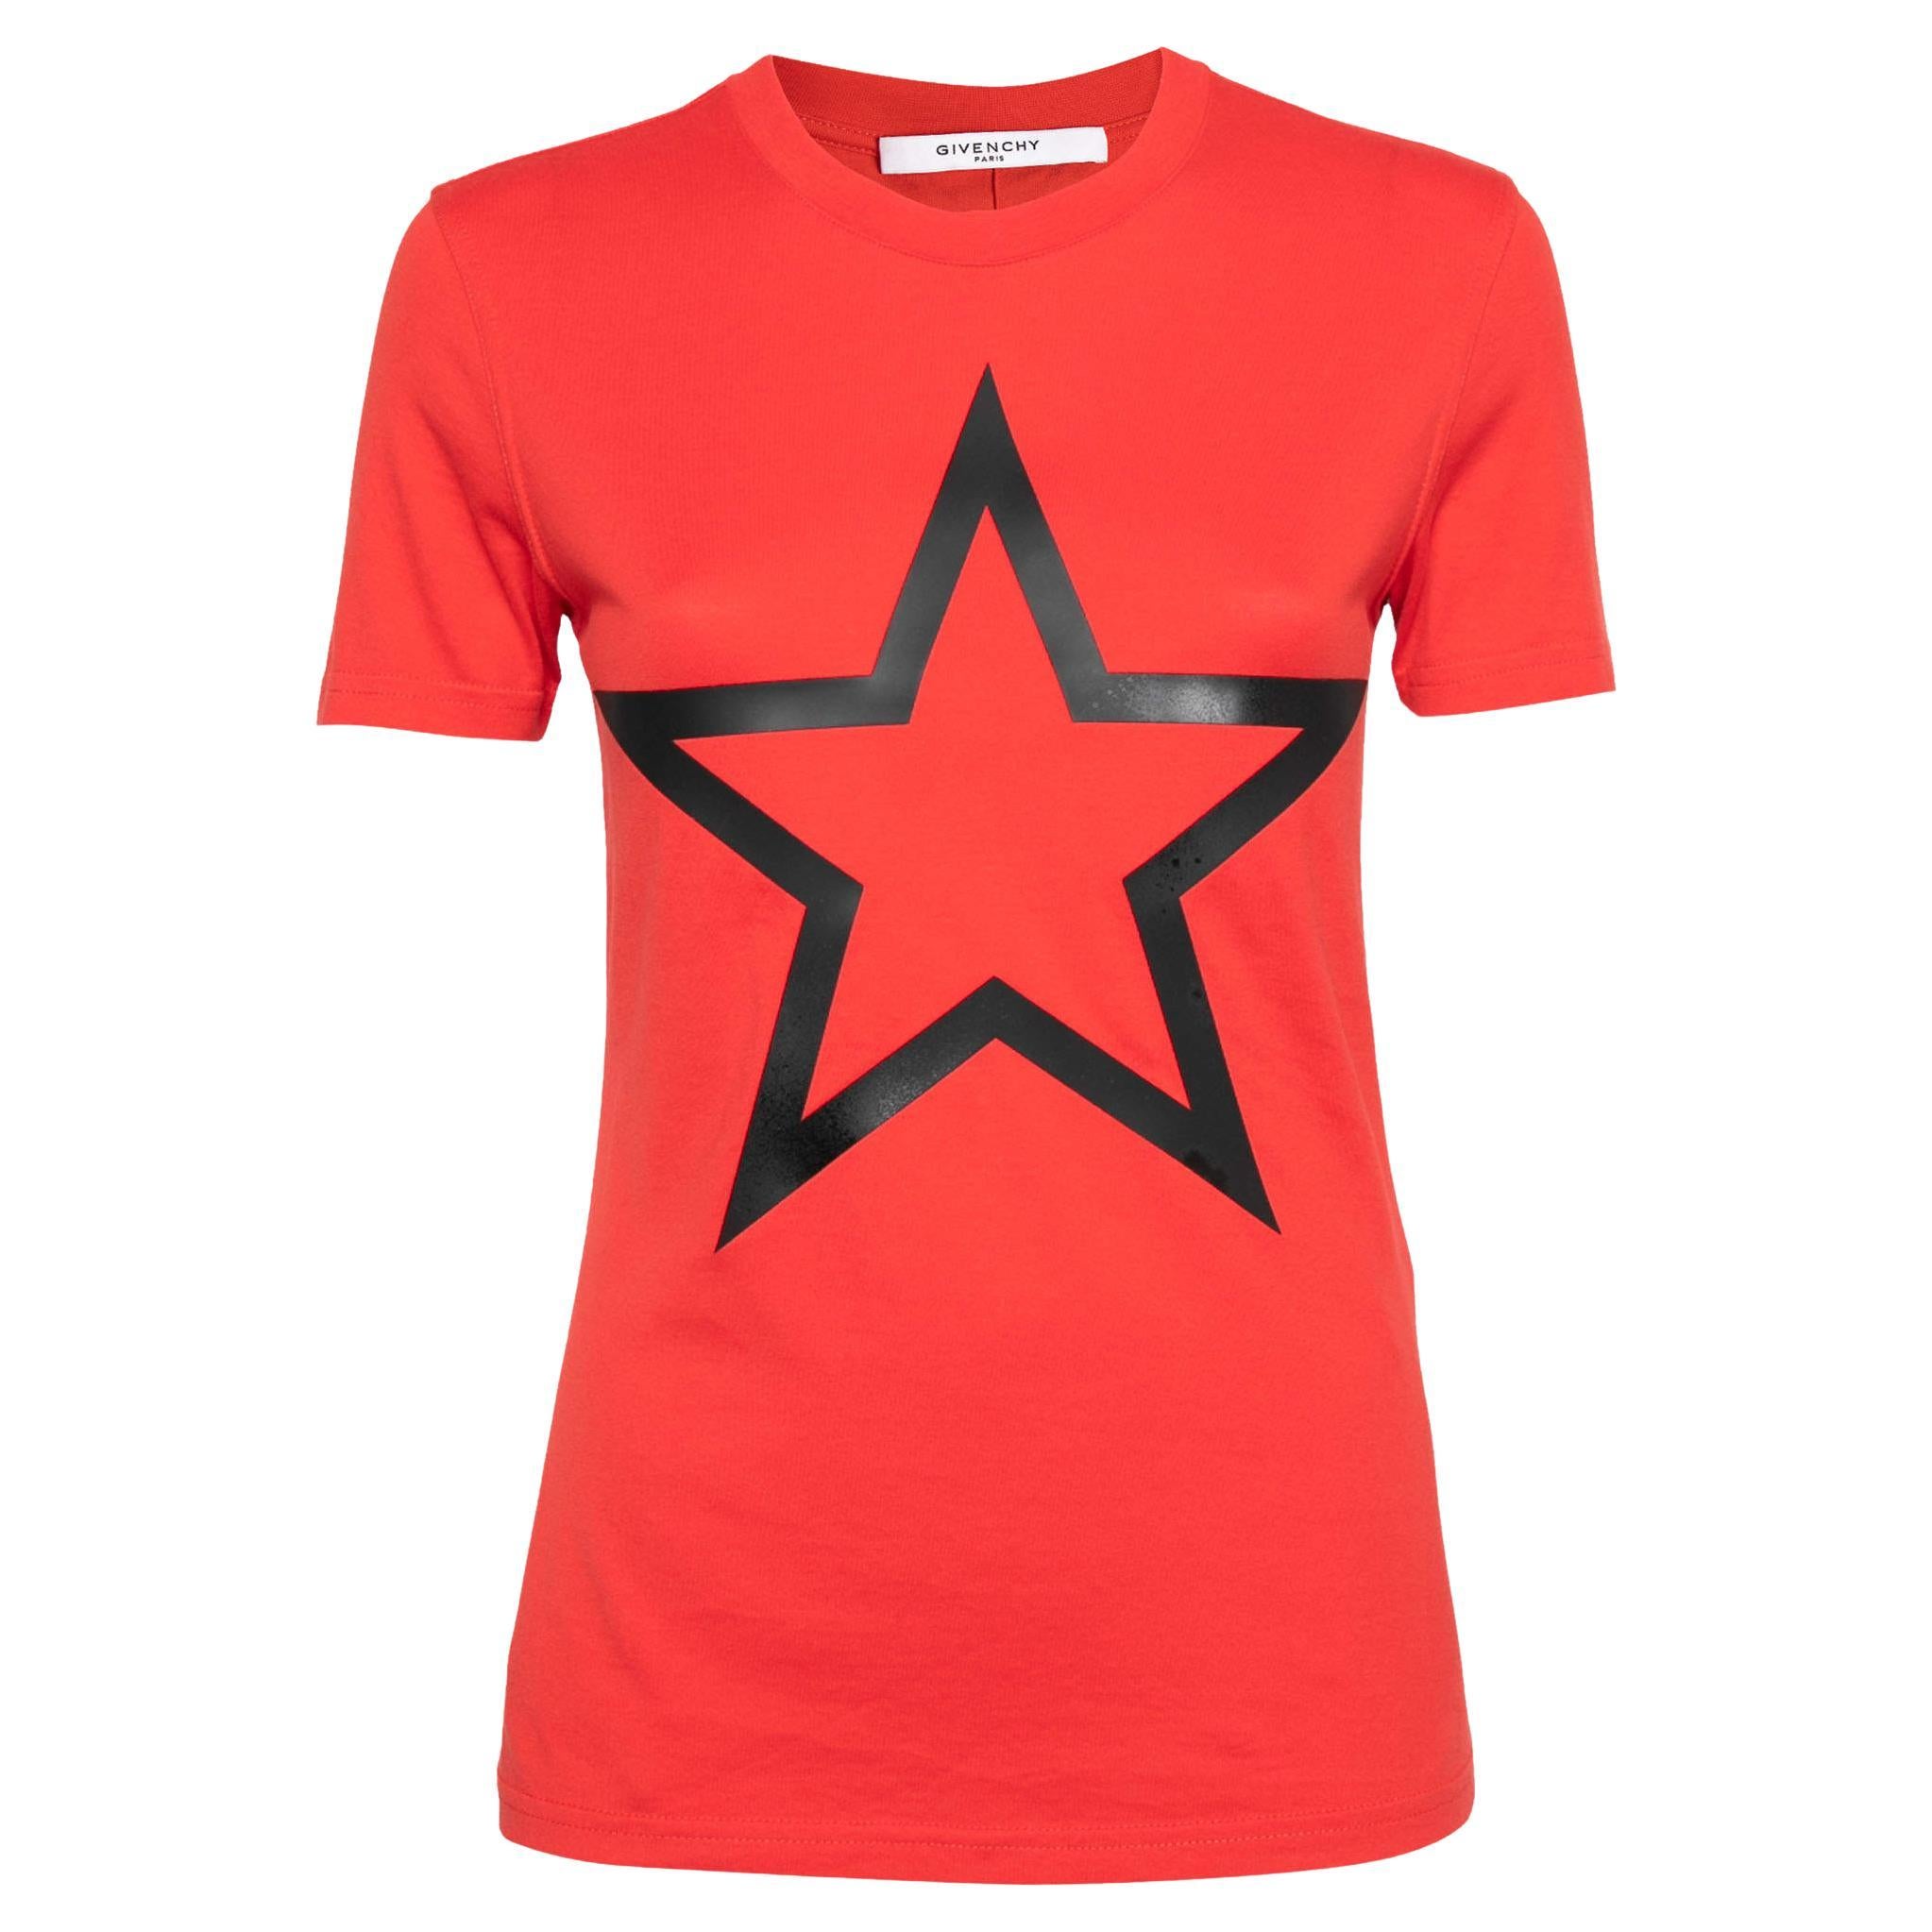 Givenchy Red Cotton Star Appliqued Short Sleeve T-Shirt S For Sale